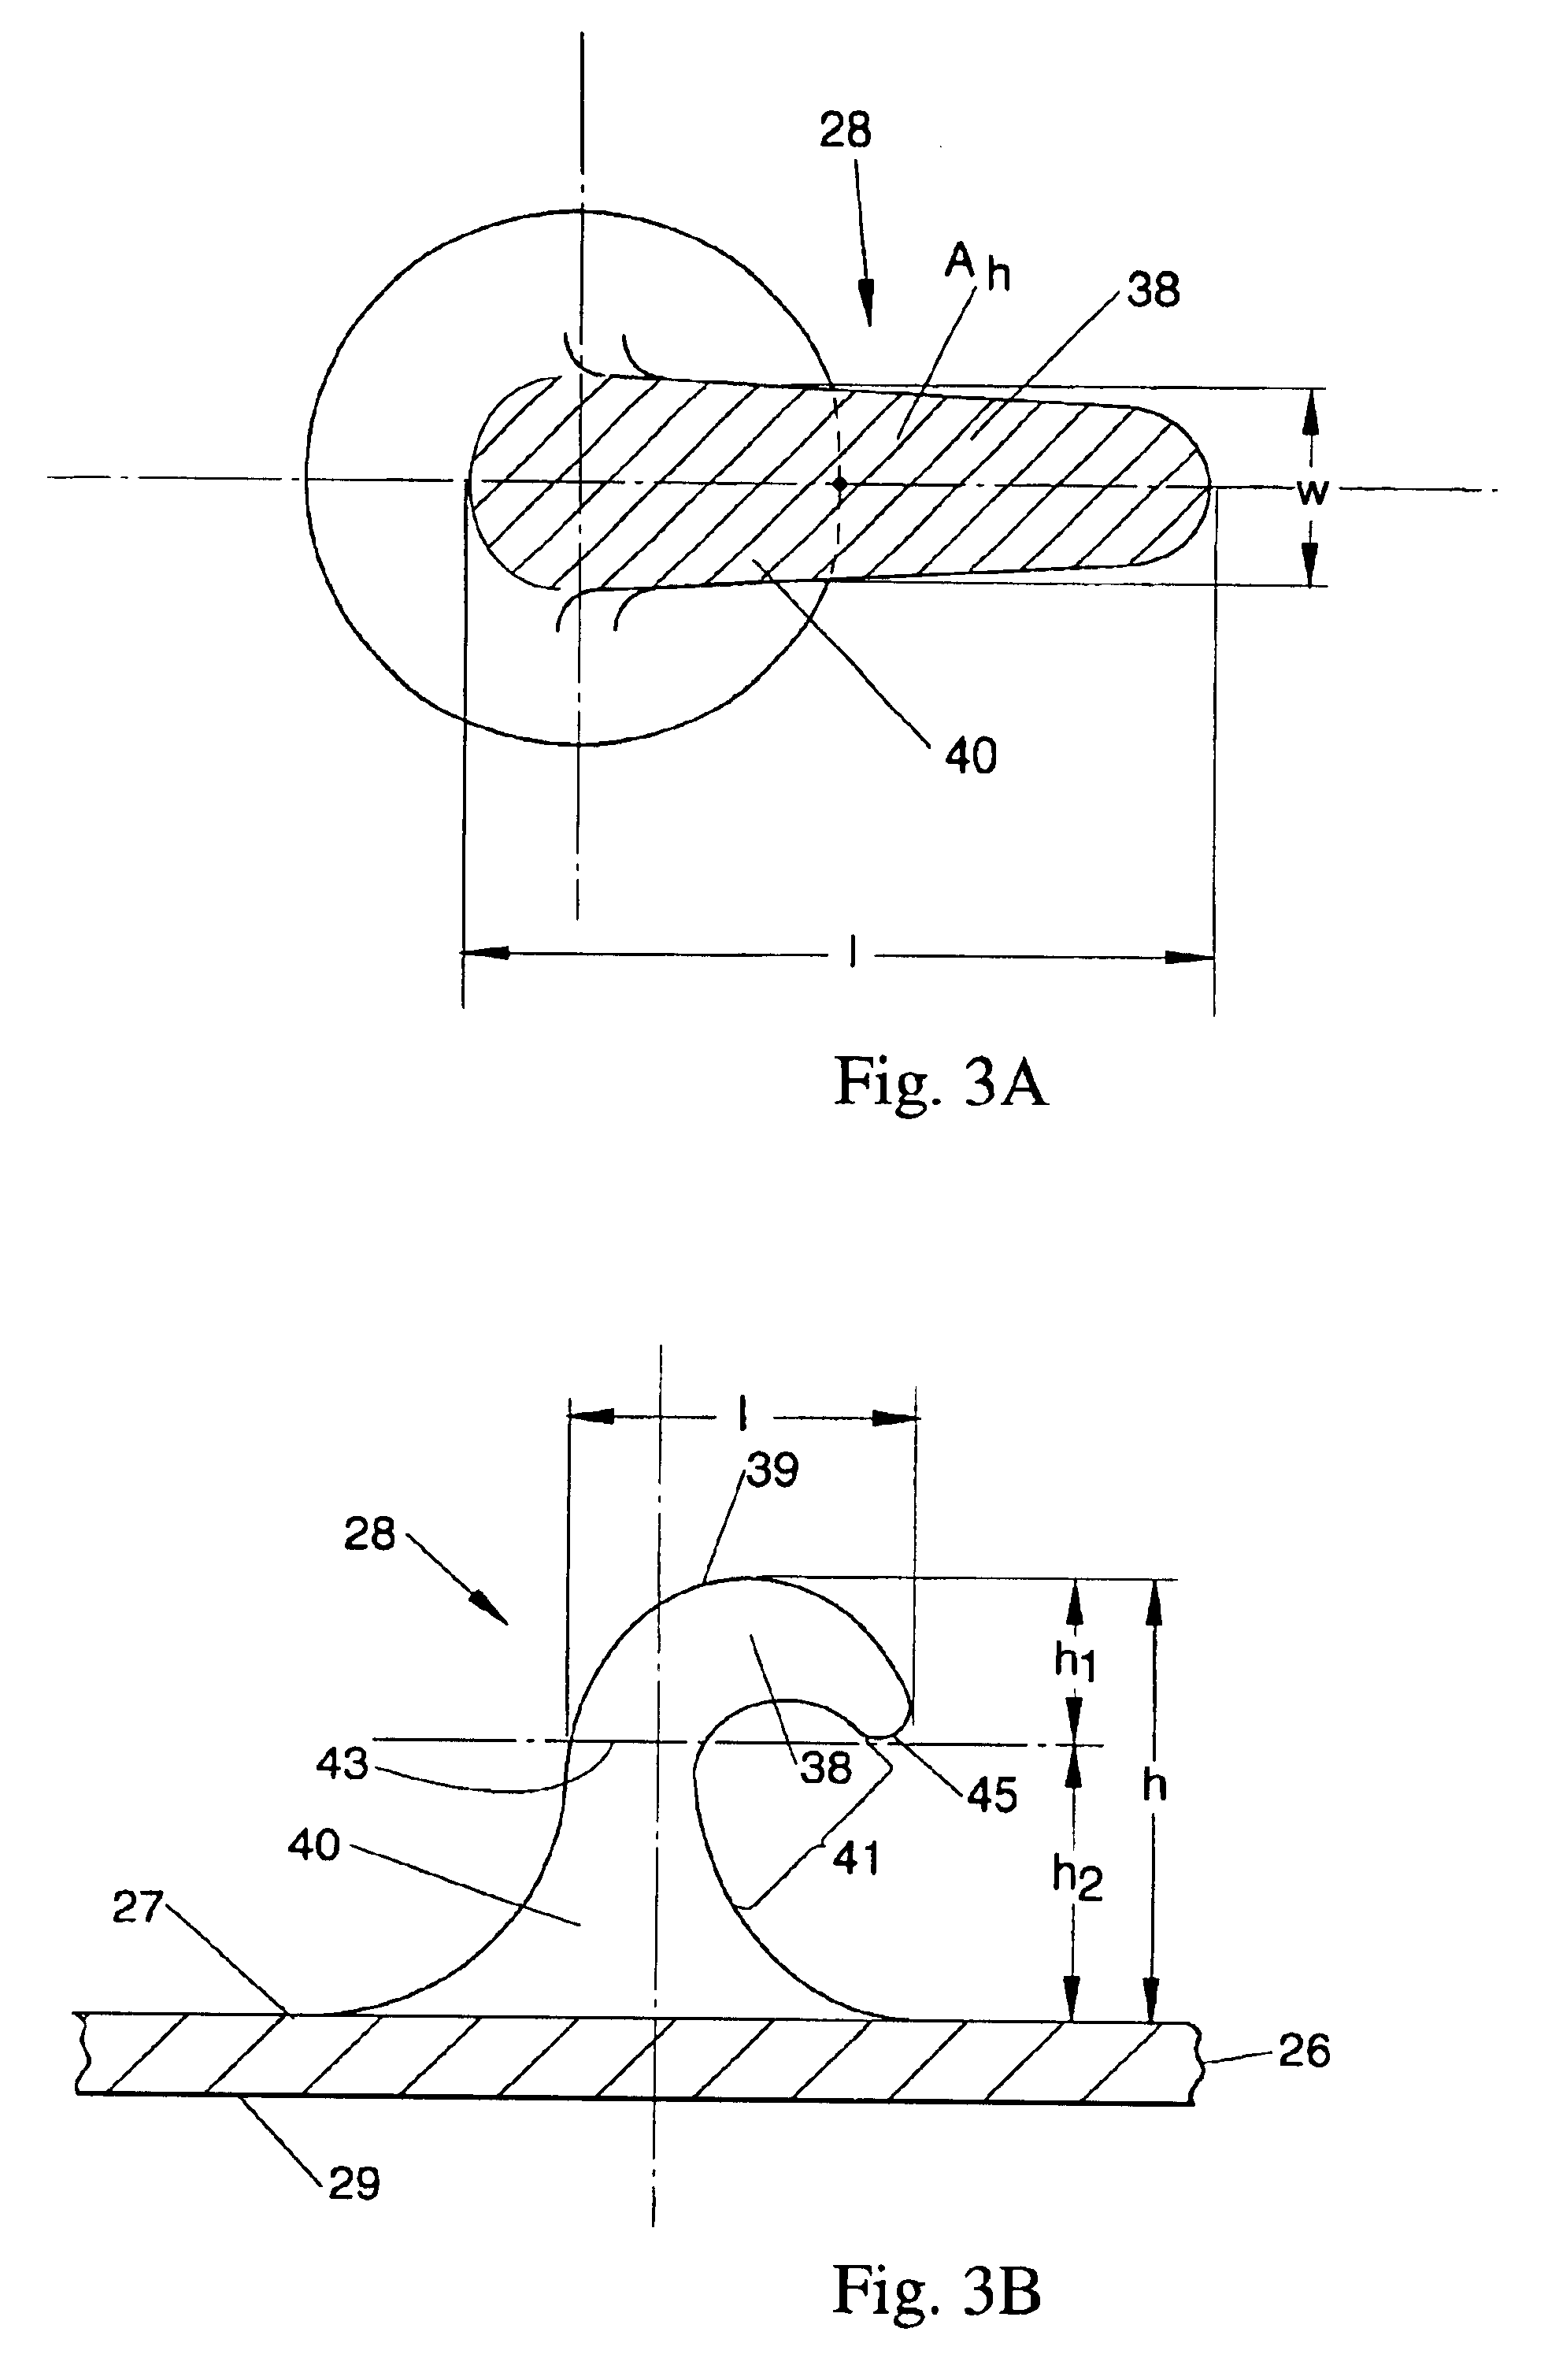 Method of making multi-layer female component for refastenable fastening device